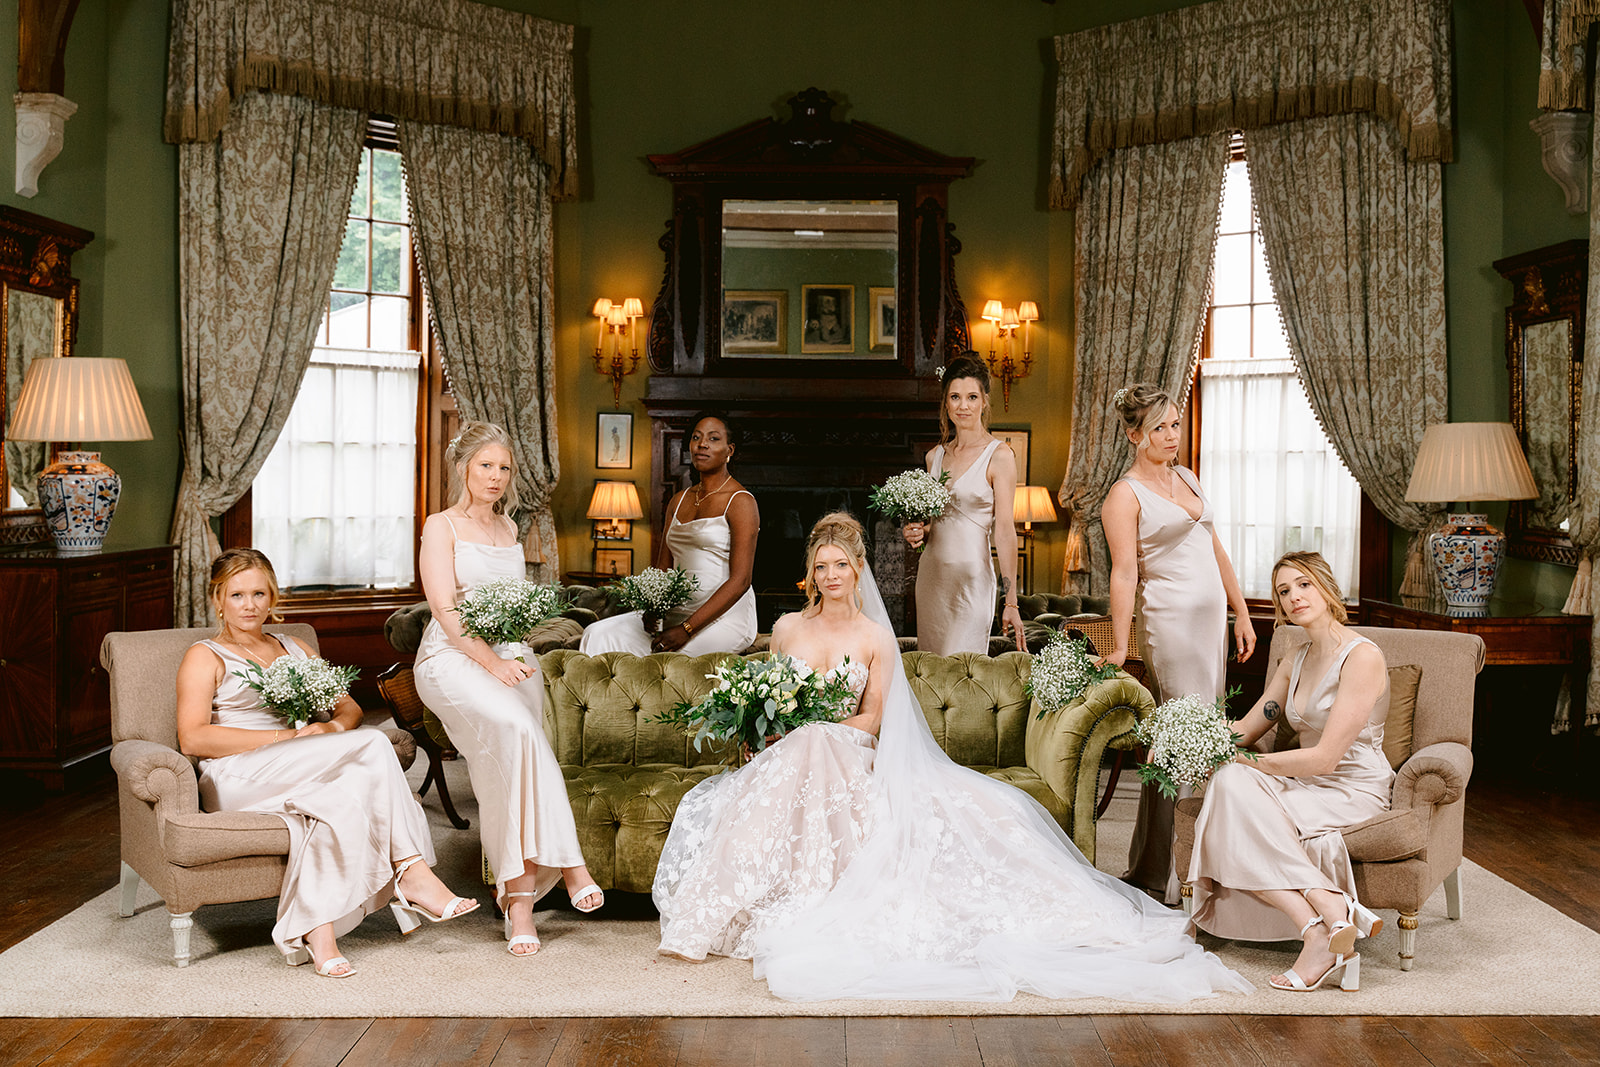 editorial style group photos at castle leslie in ireland